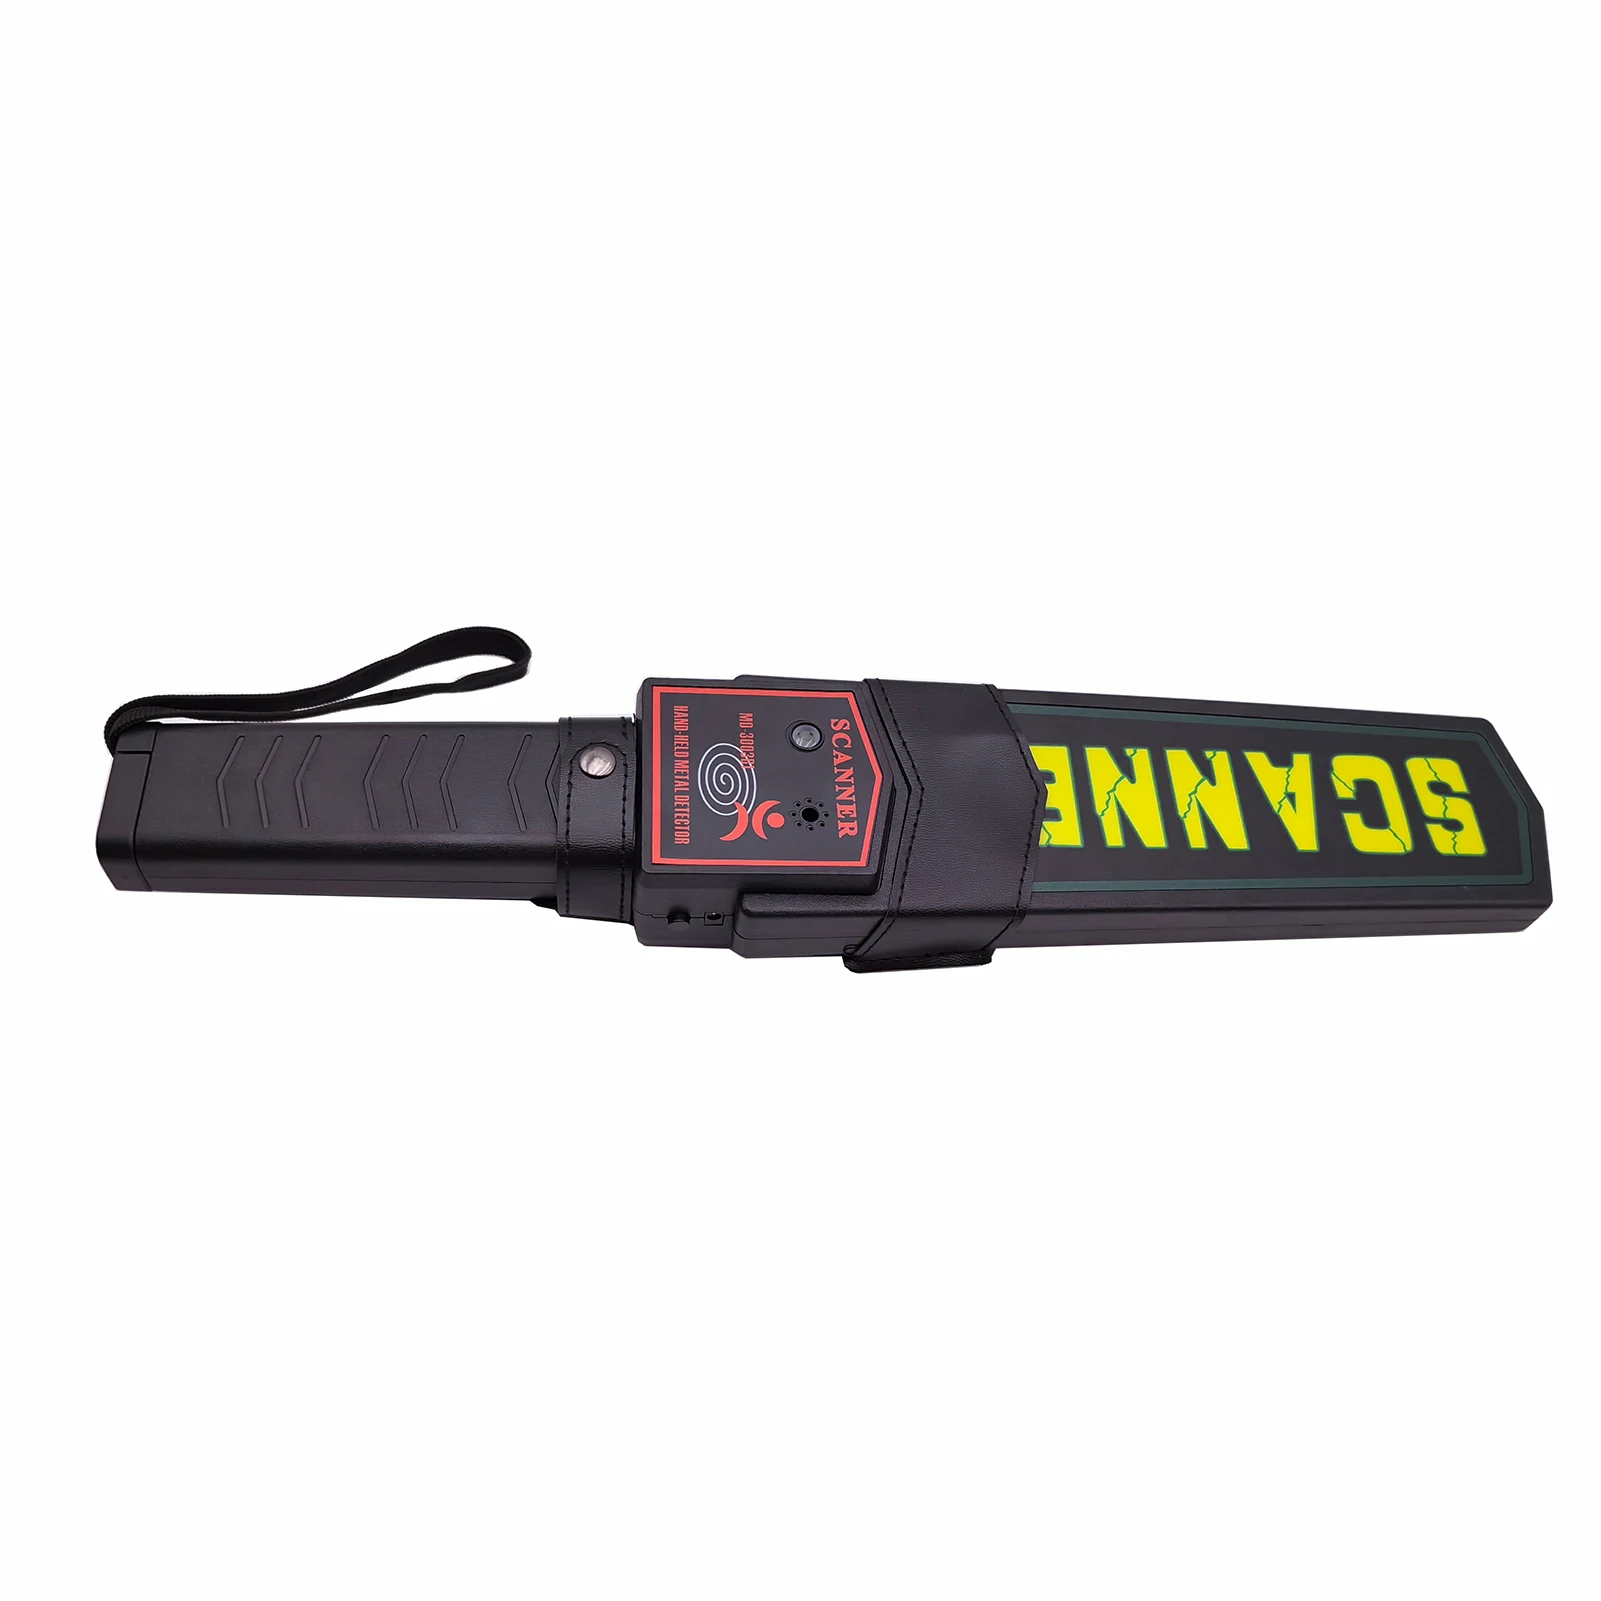 

Good quality MD-3003B1 Security Wand Handy Scanner Full Body Hand Held Security Metal Detector